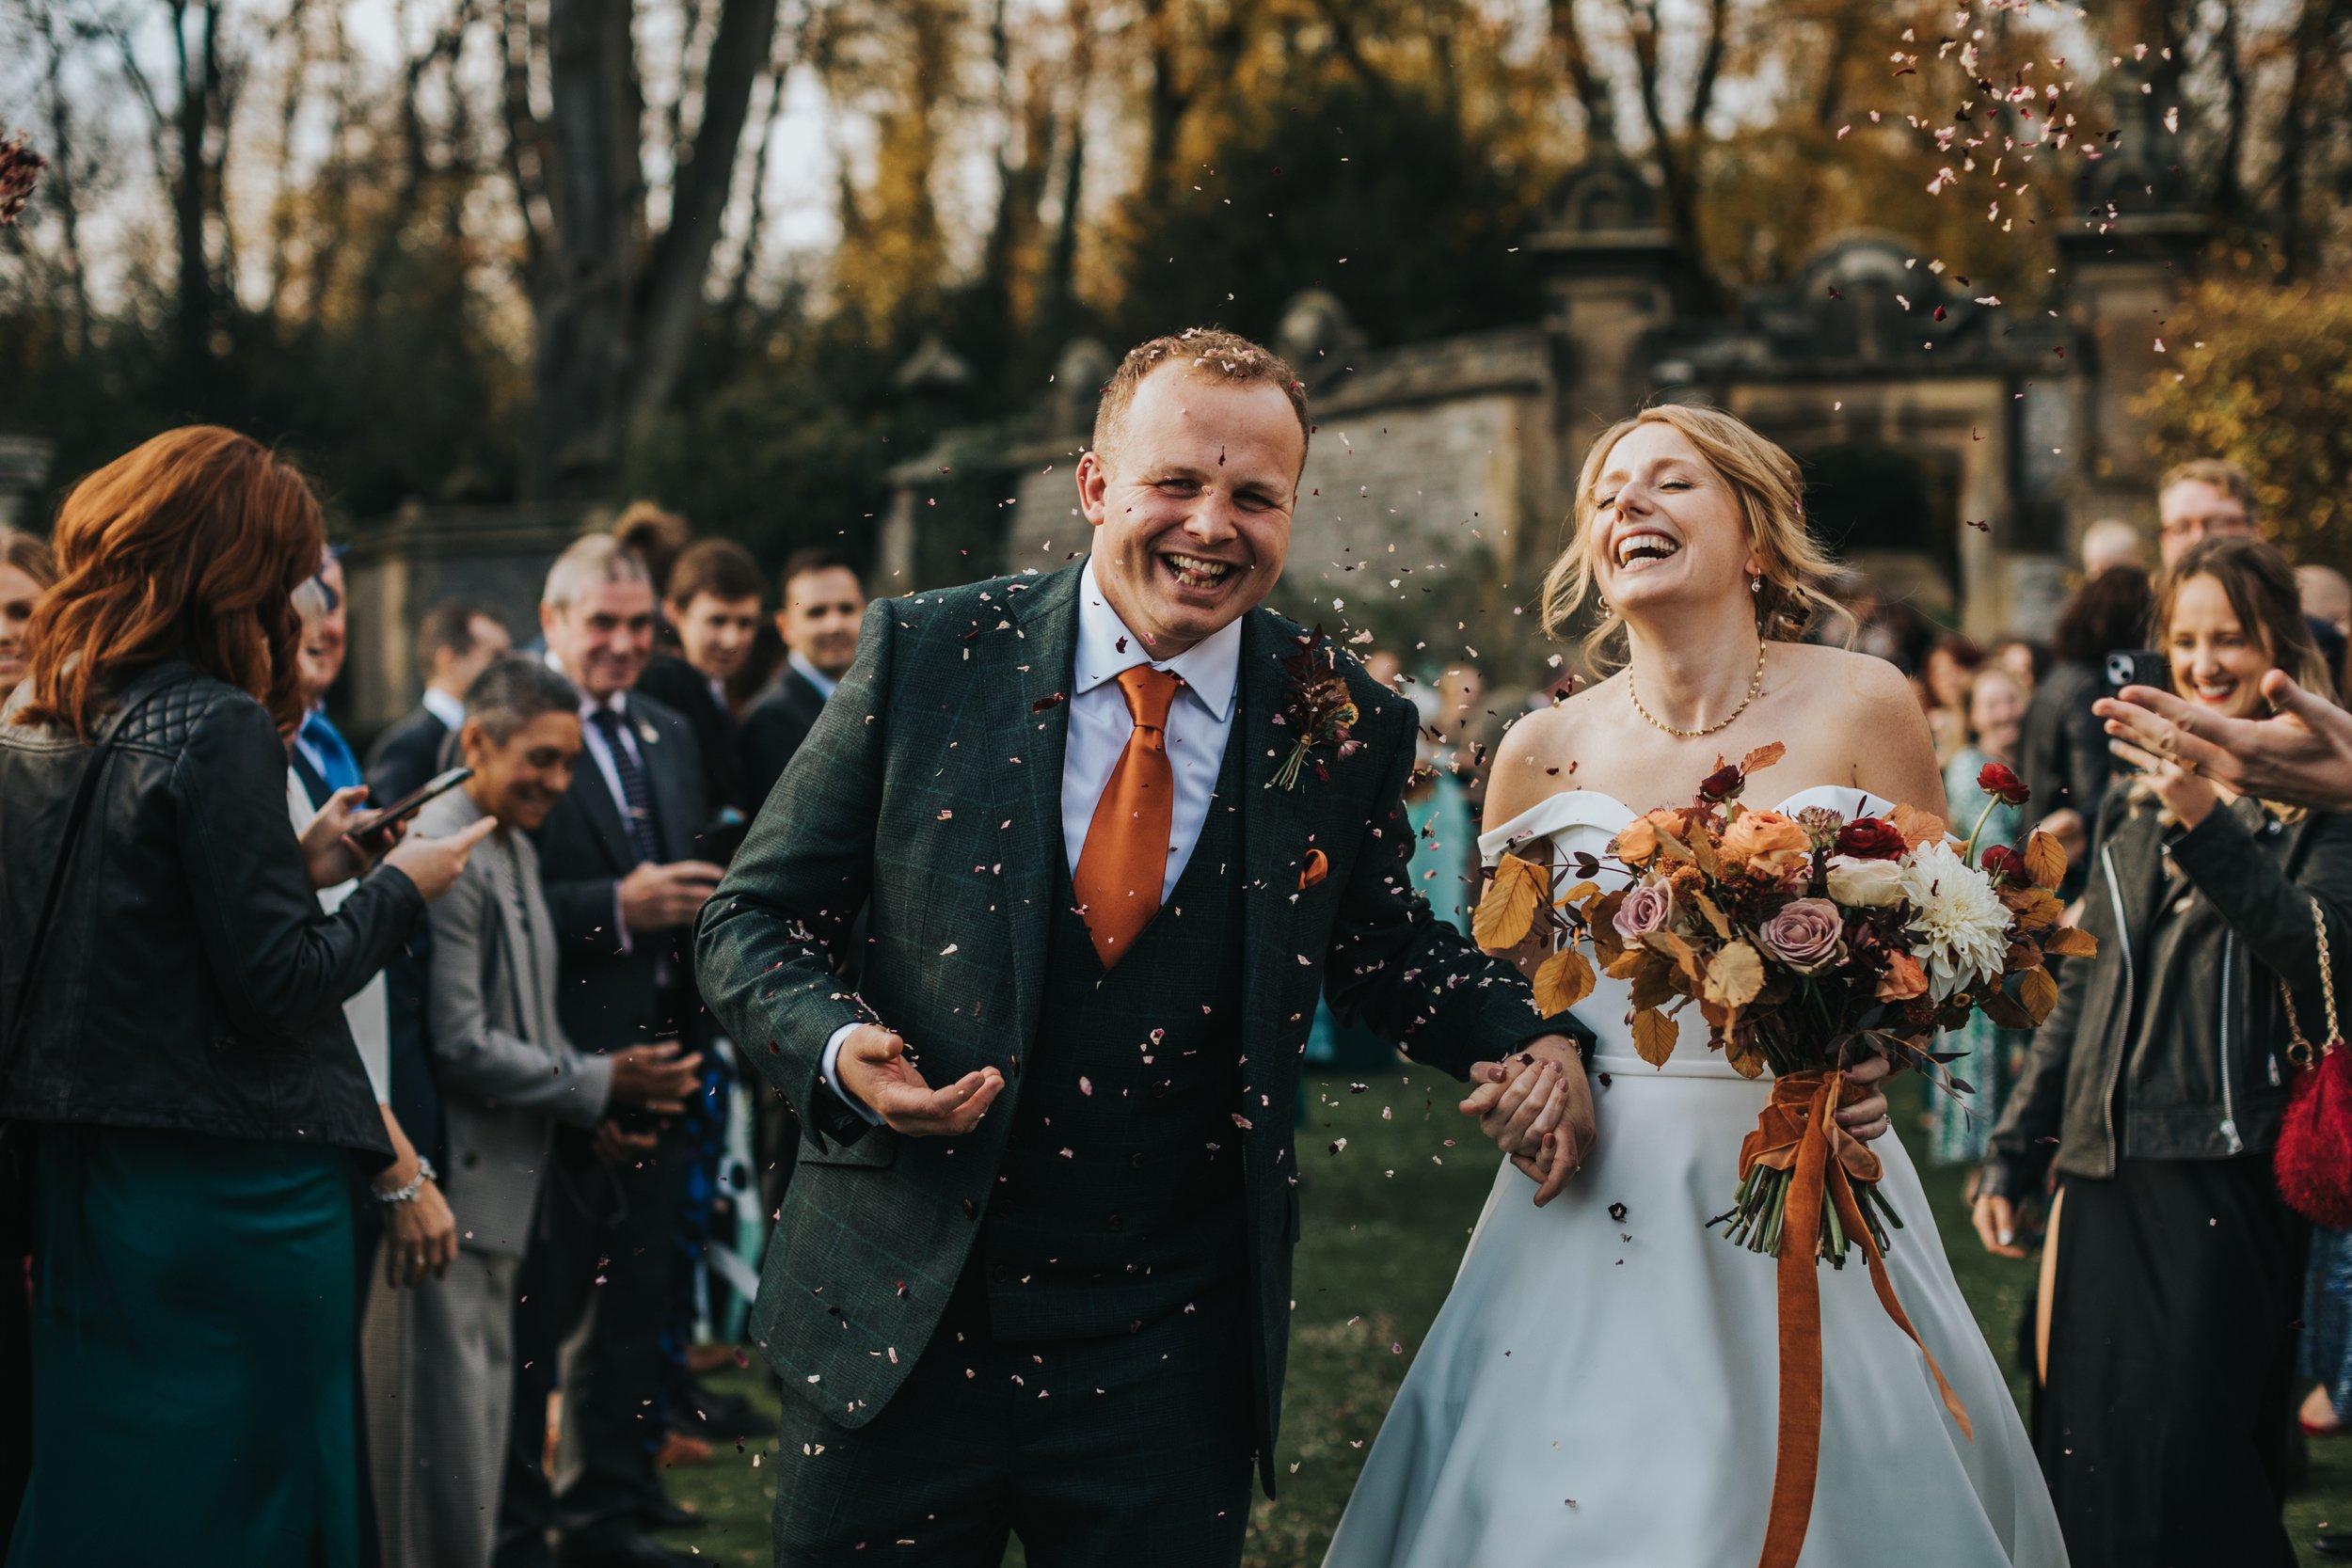 Groom looks at camera laughing as confetti is till being thrown at them. 